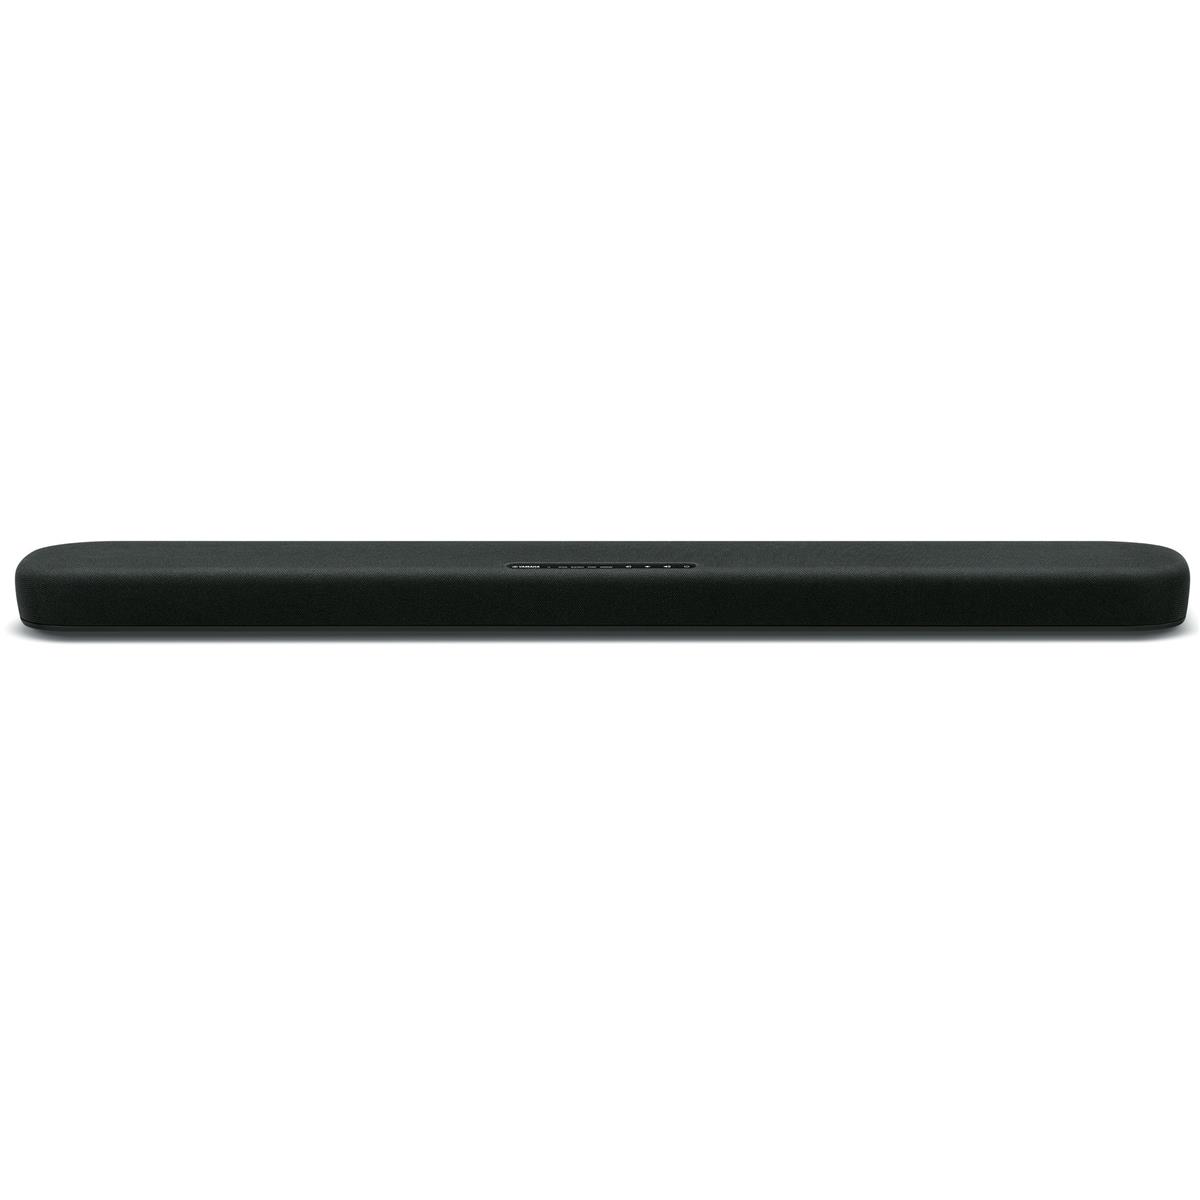 Image of Yamaha SR-B20A Sound Bar with Dual Built-In Subwoofers